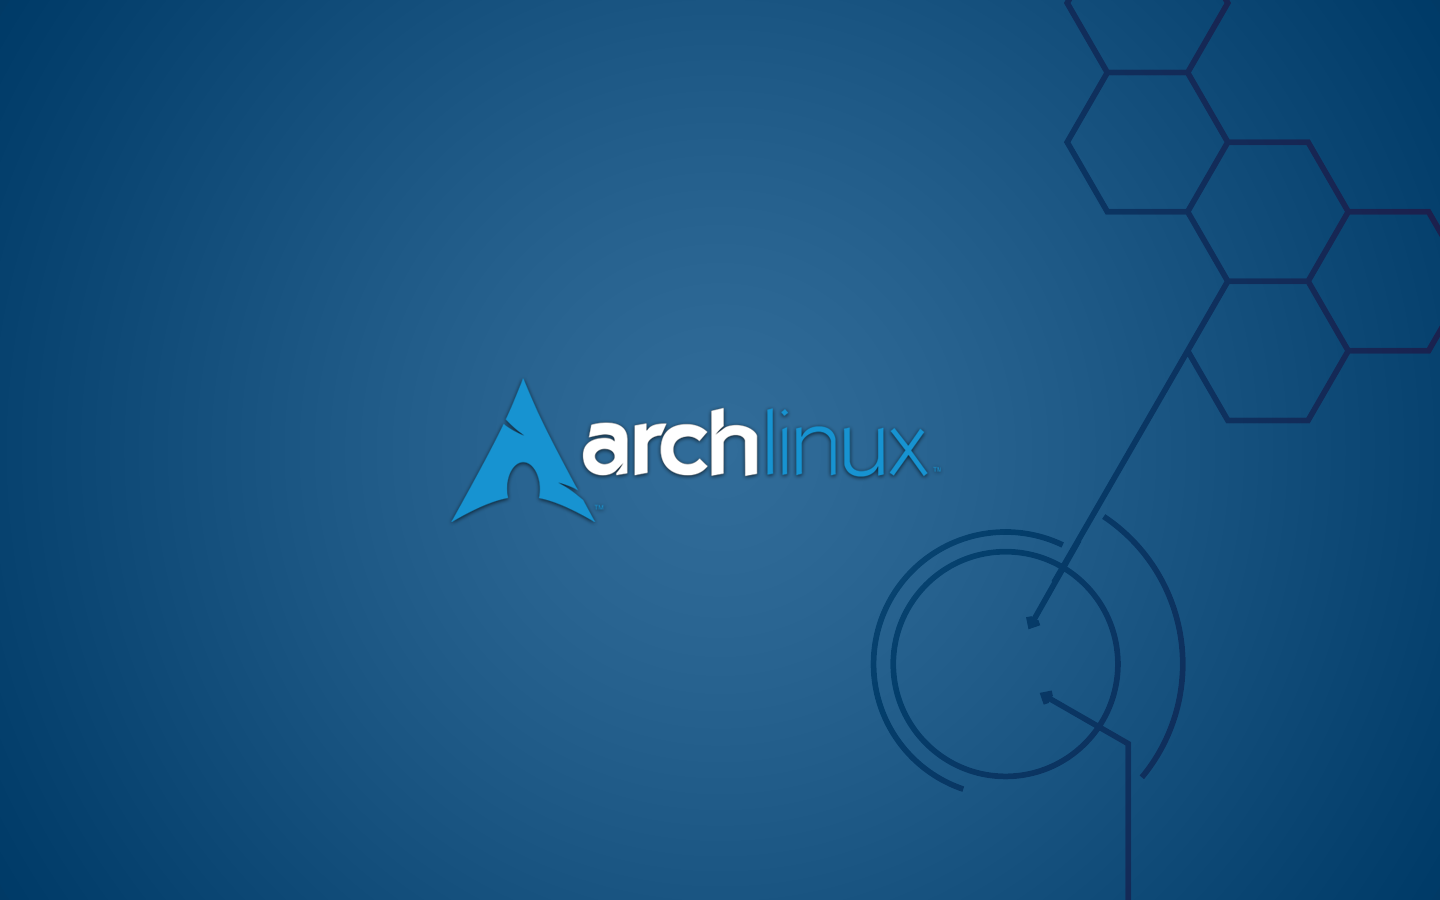 Arch Linux submited images